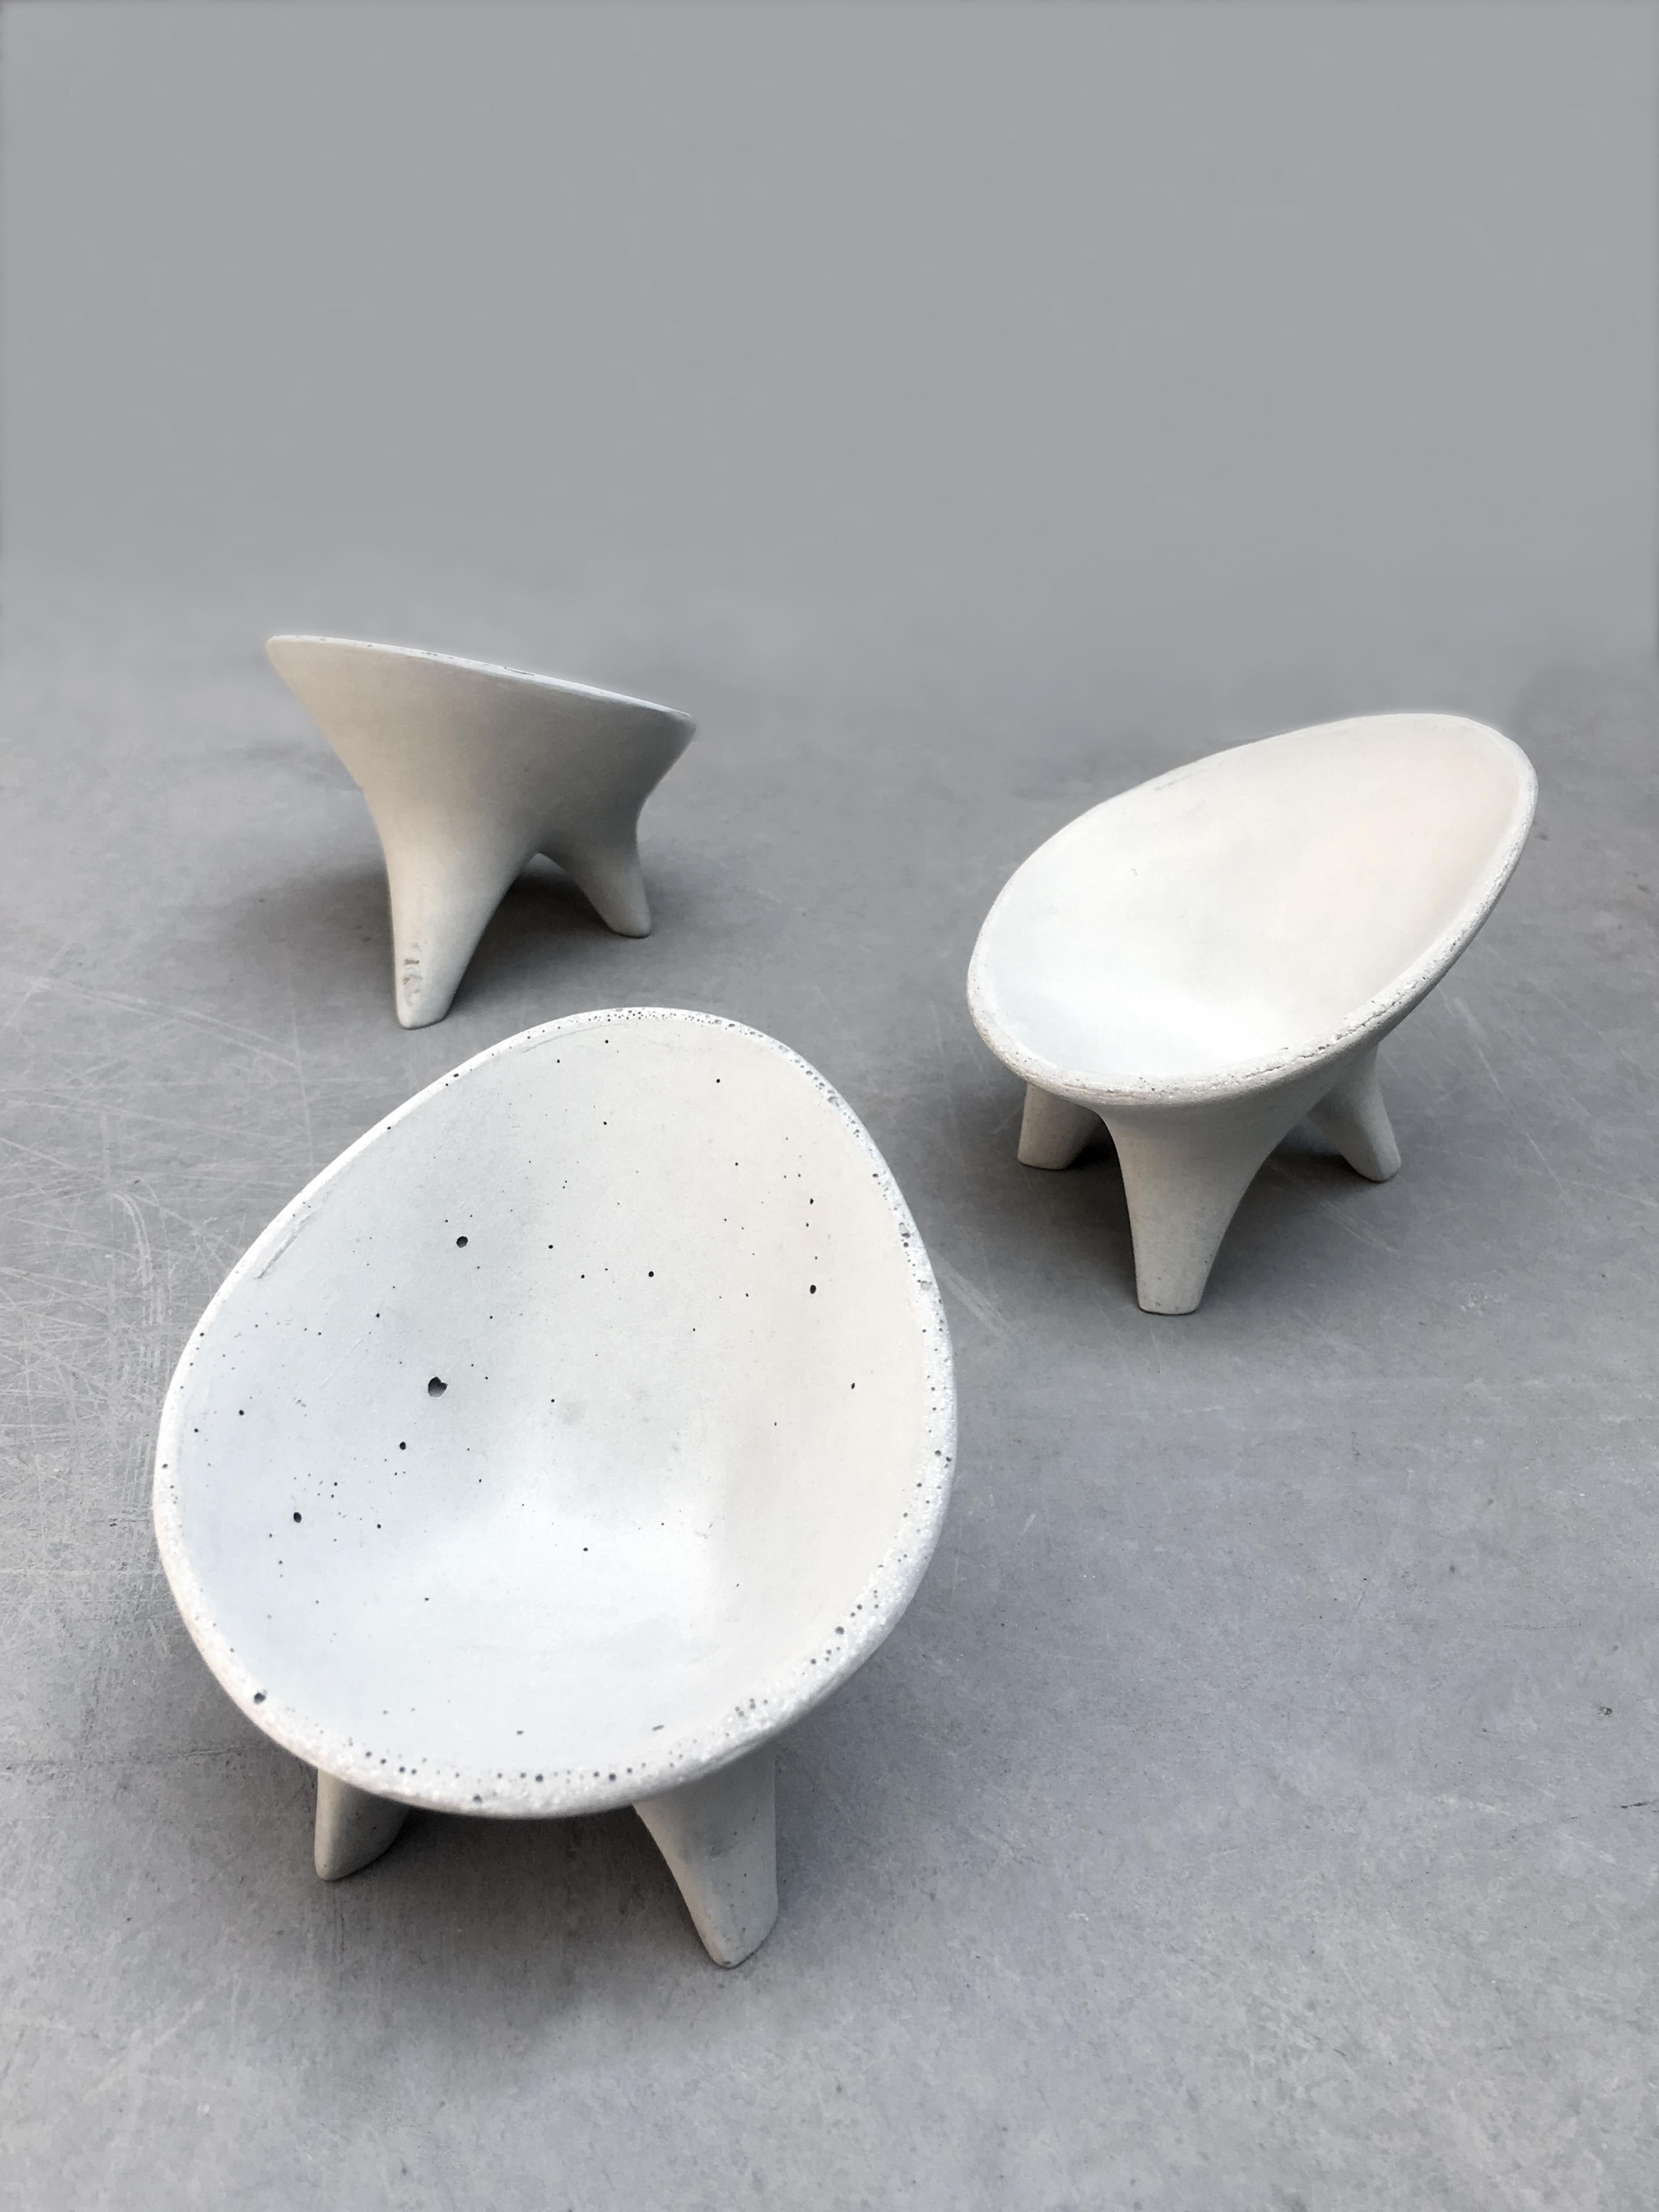 Contemporary Mexican design concrete miniature chair hand-polished by Mexican artisans. A collaboration with MDC.